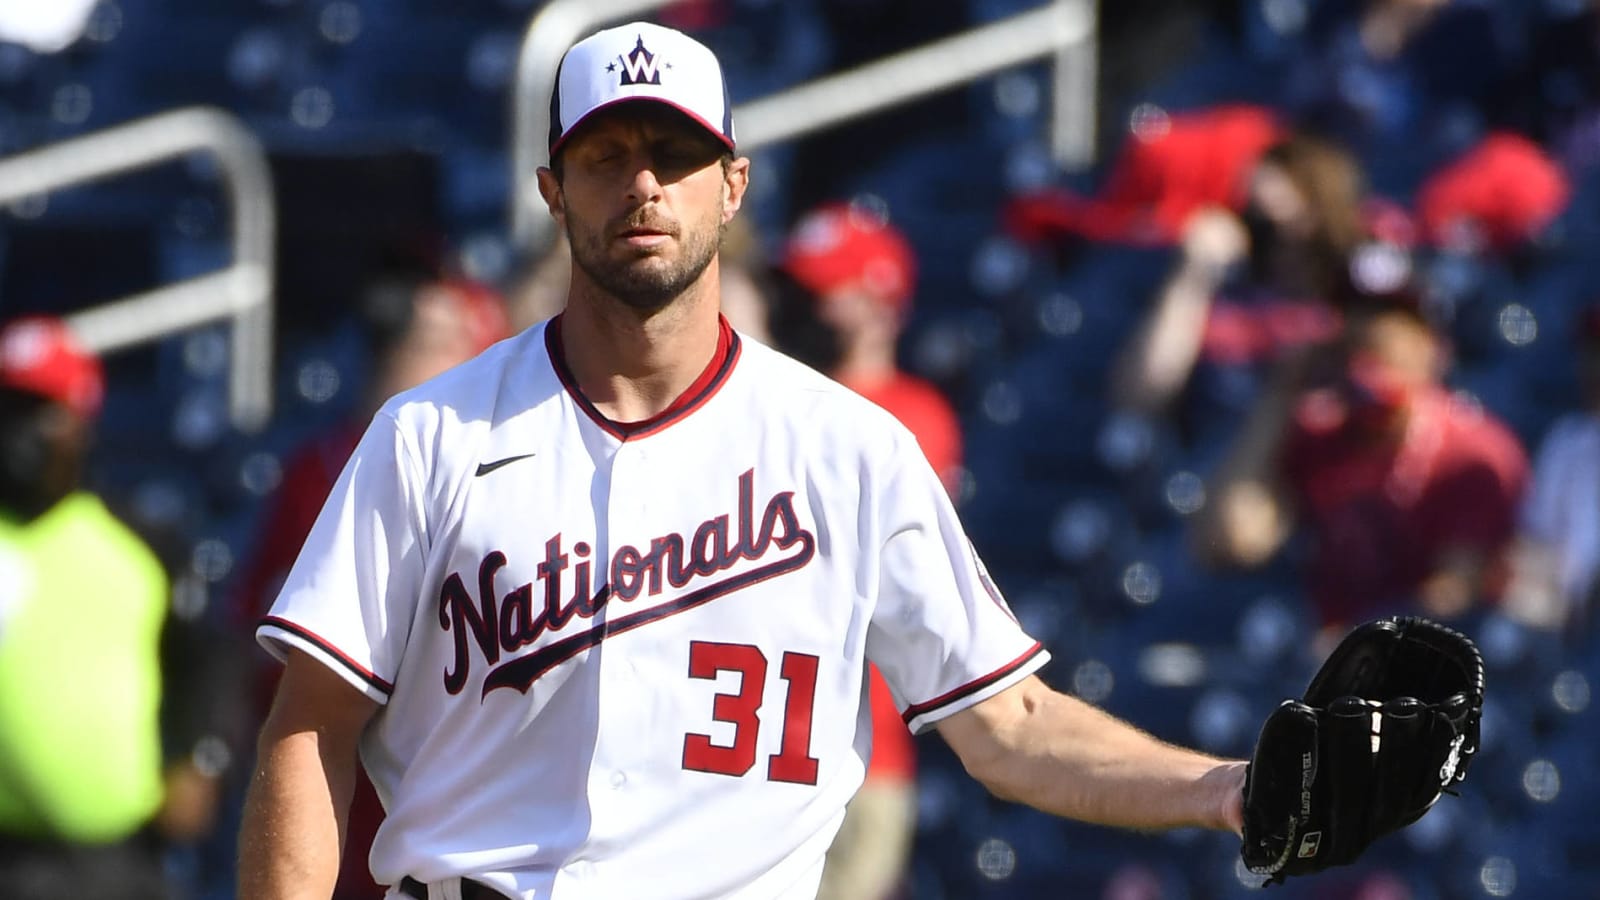 Scherzer has great question about Nats' fan attendance policy